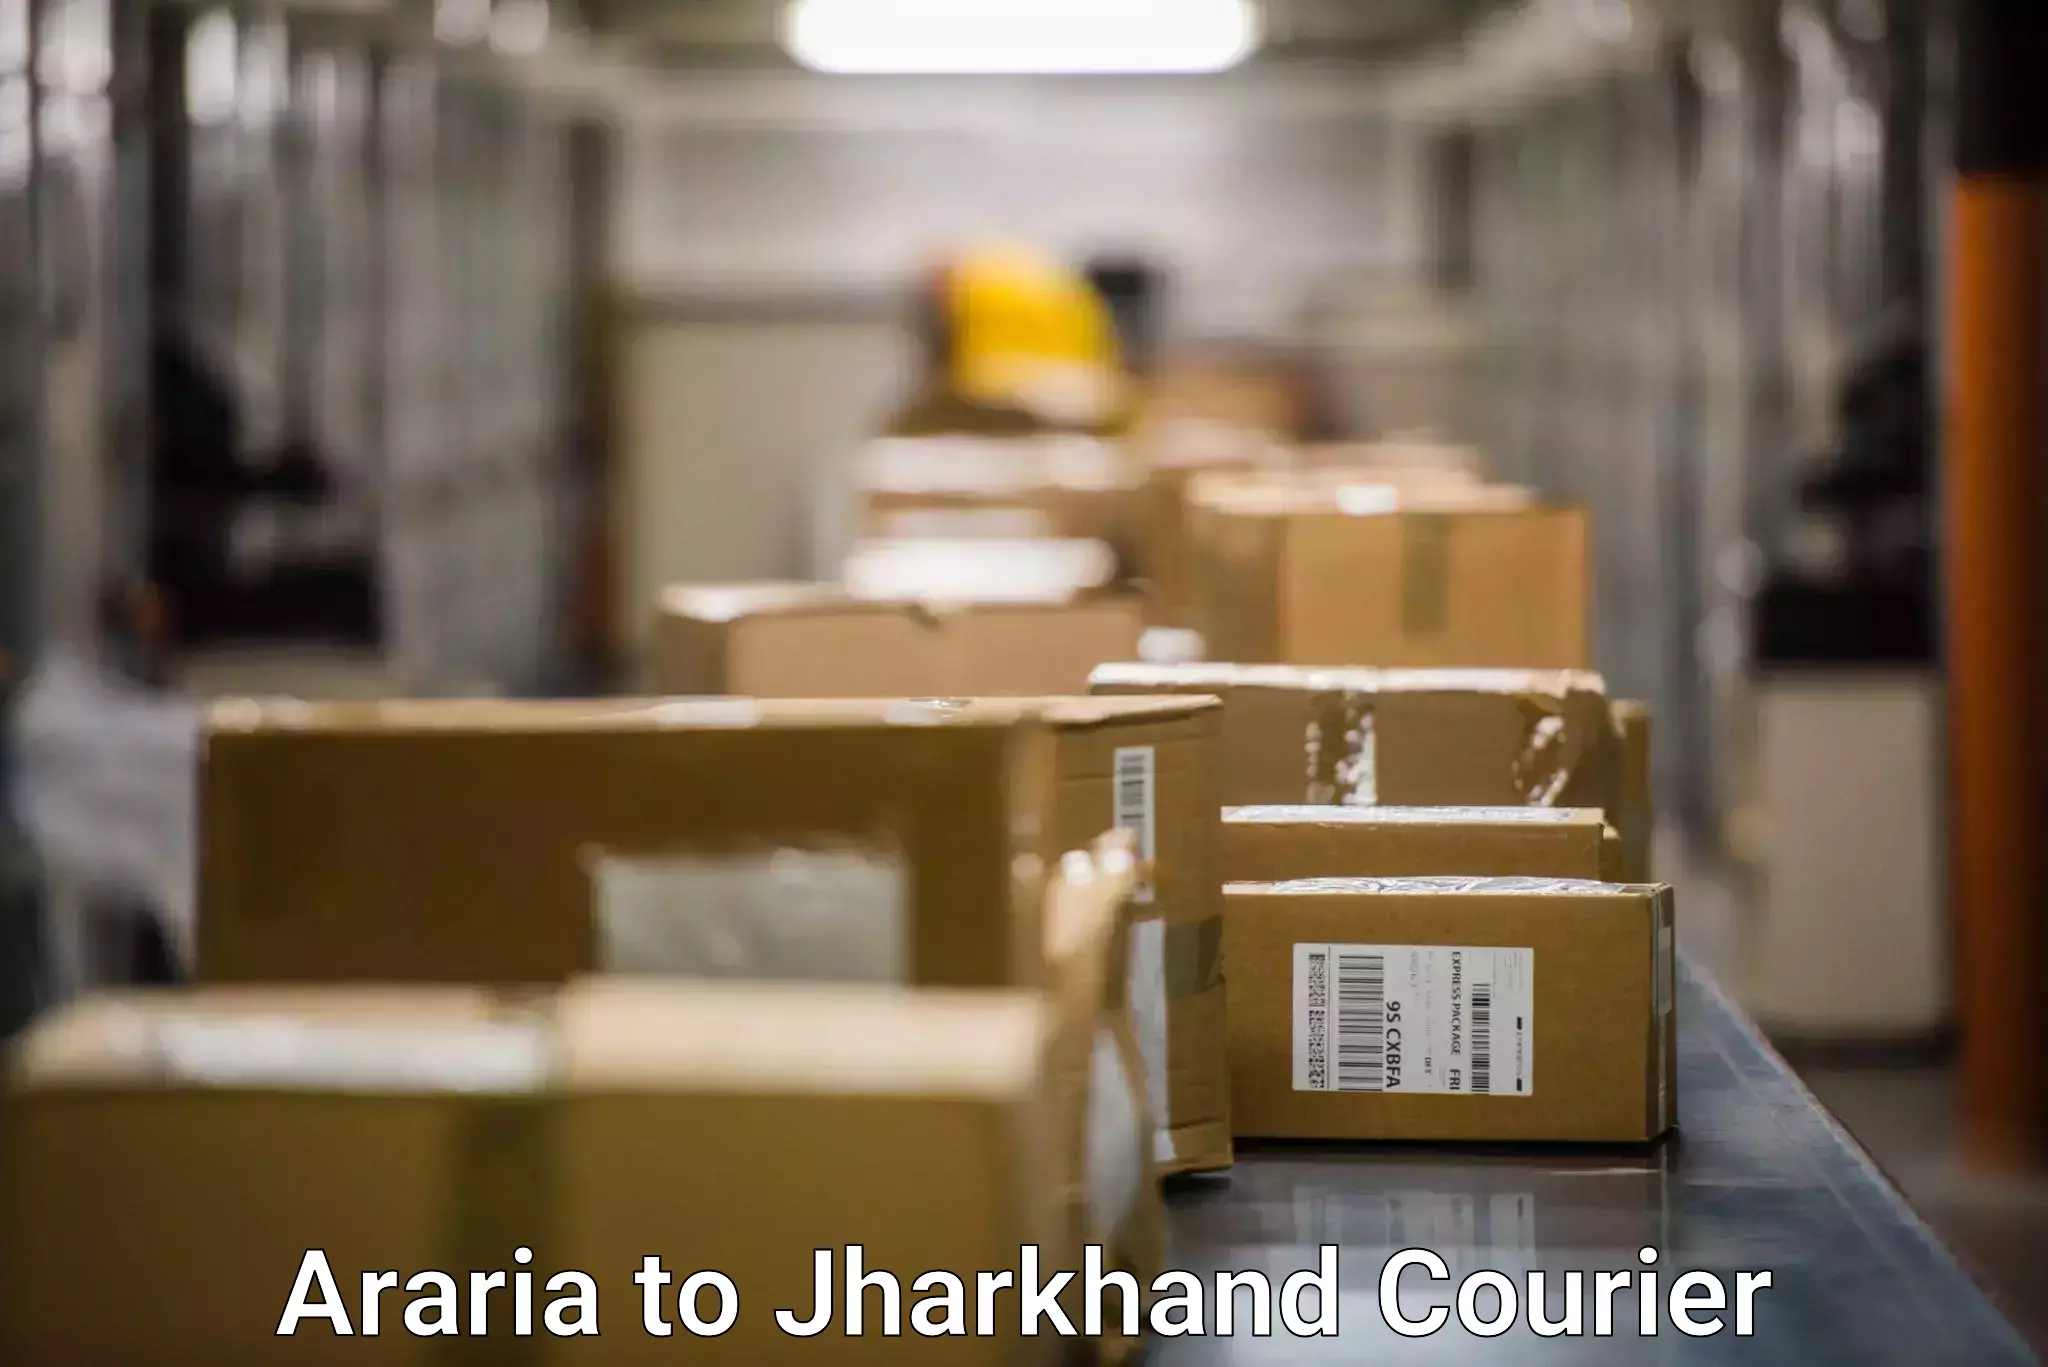 Package delivery network Araria to Jharkhand